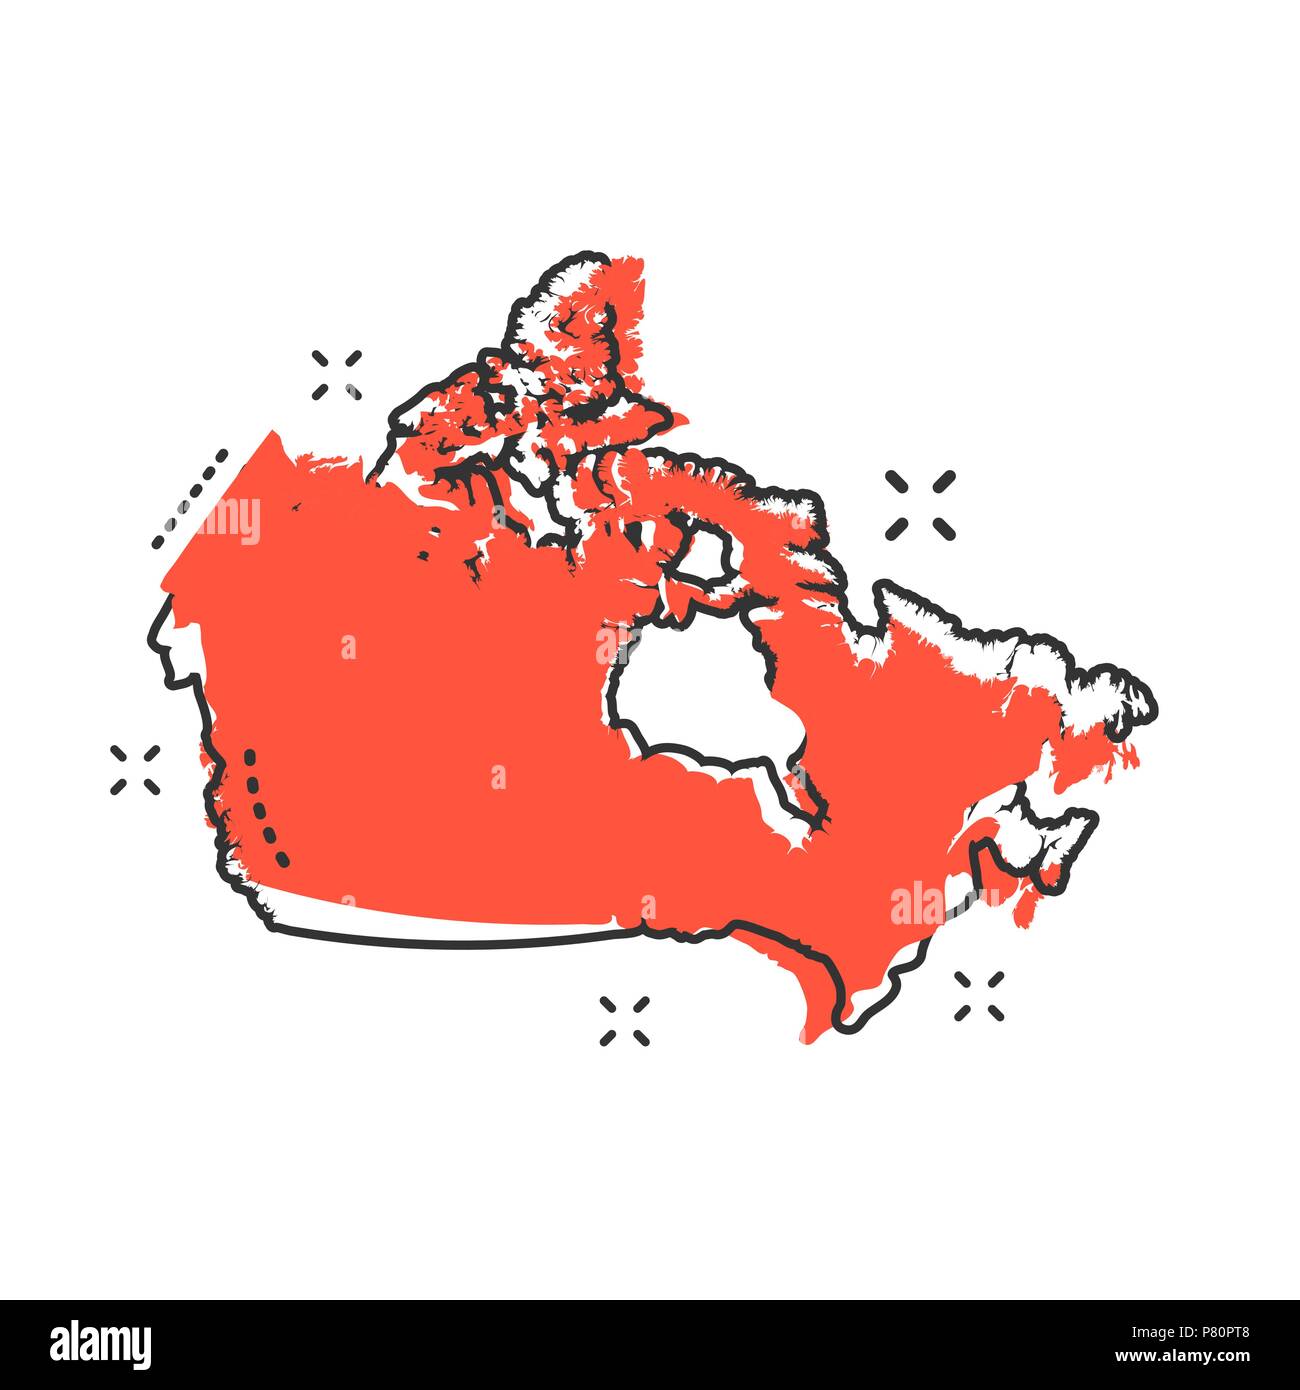 Cartoon Canada map icon in comic style. Canada illustration pictogram. Country geography sign splash business concept. Stock Vector